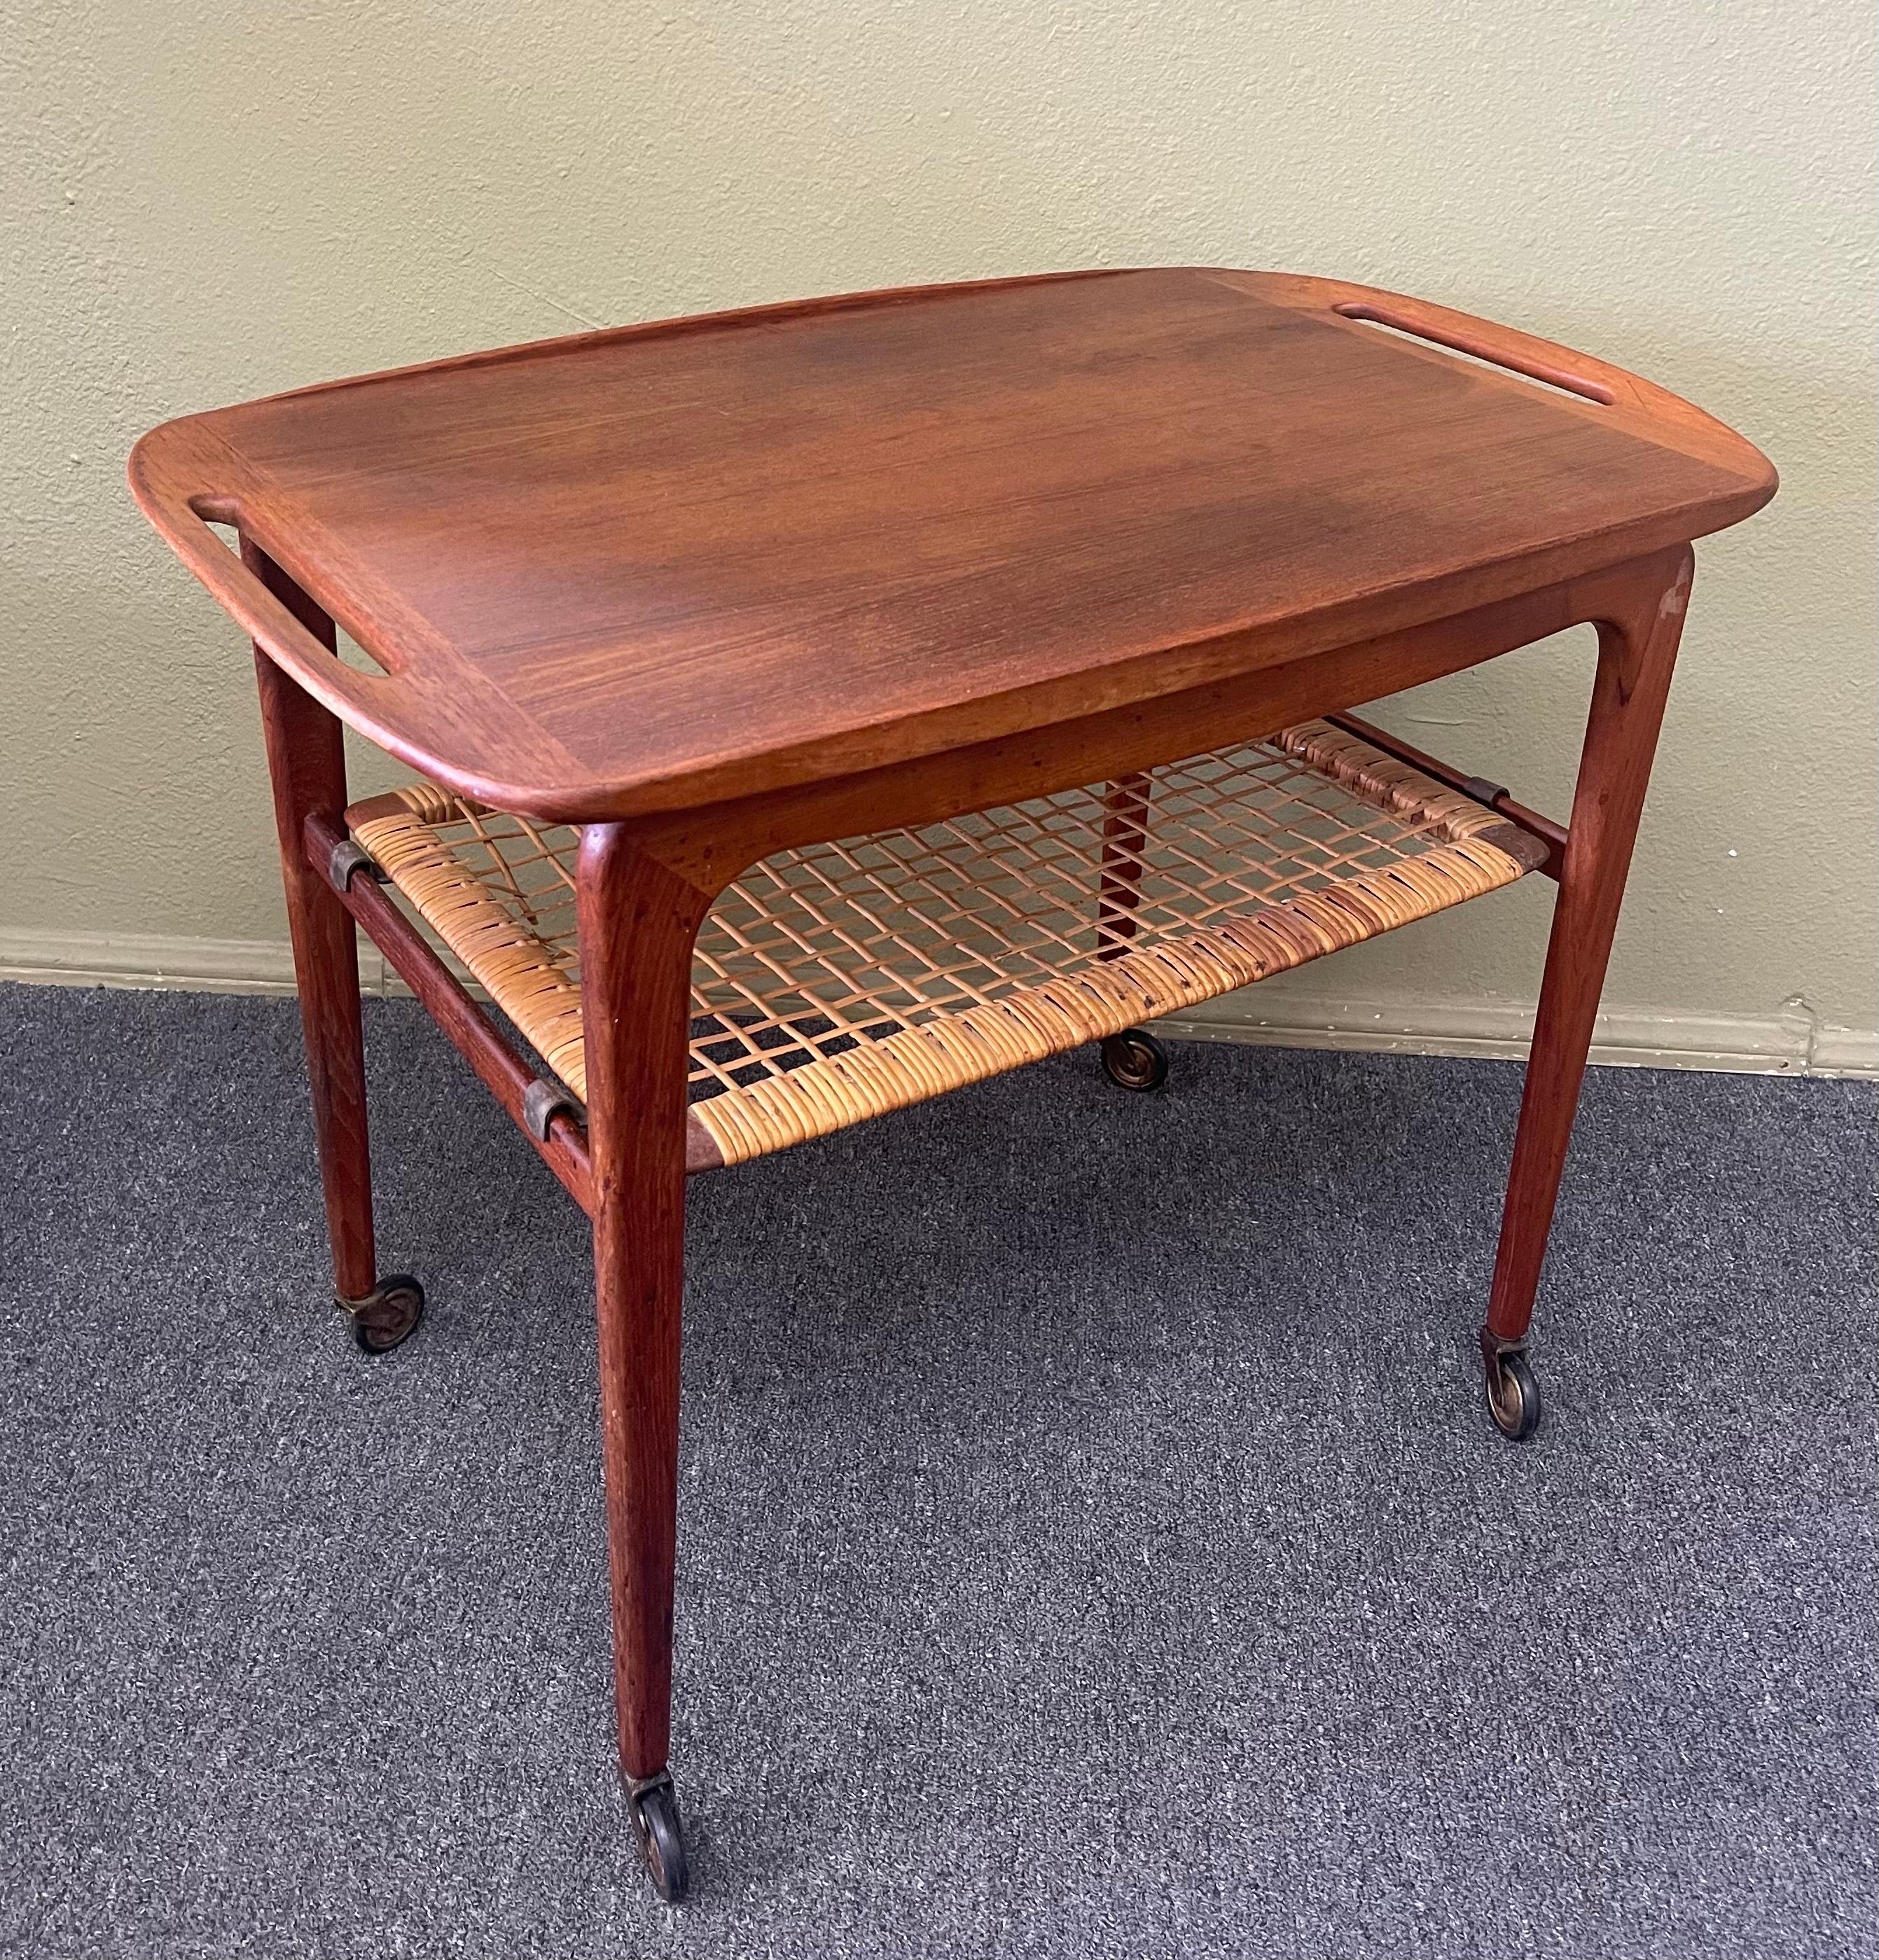 Super rare and extremely desirable Danish modern teak bar cart with removable tray & cane shelf by Johannes Andersen for CFC Silkeborg circa 1950s. The cart has a removable teak shelf with two handles and a lower cane magazine shelf that is also